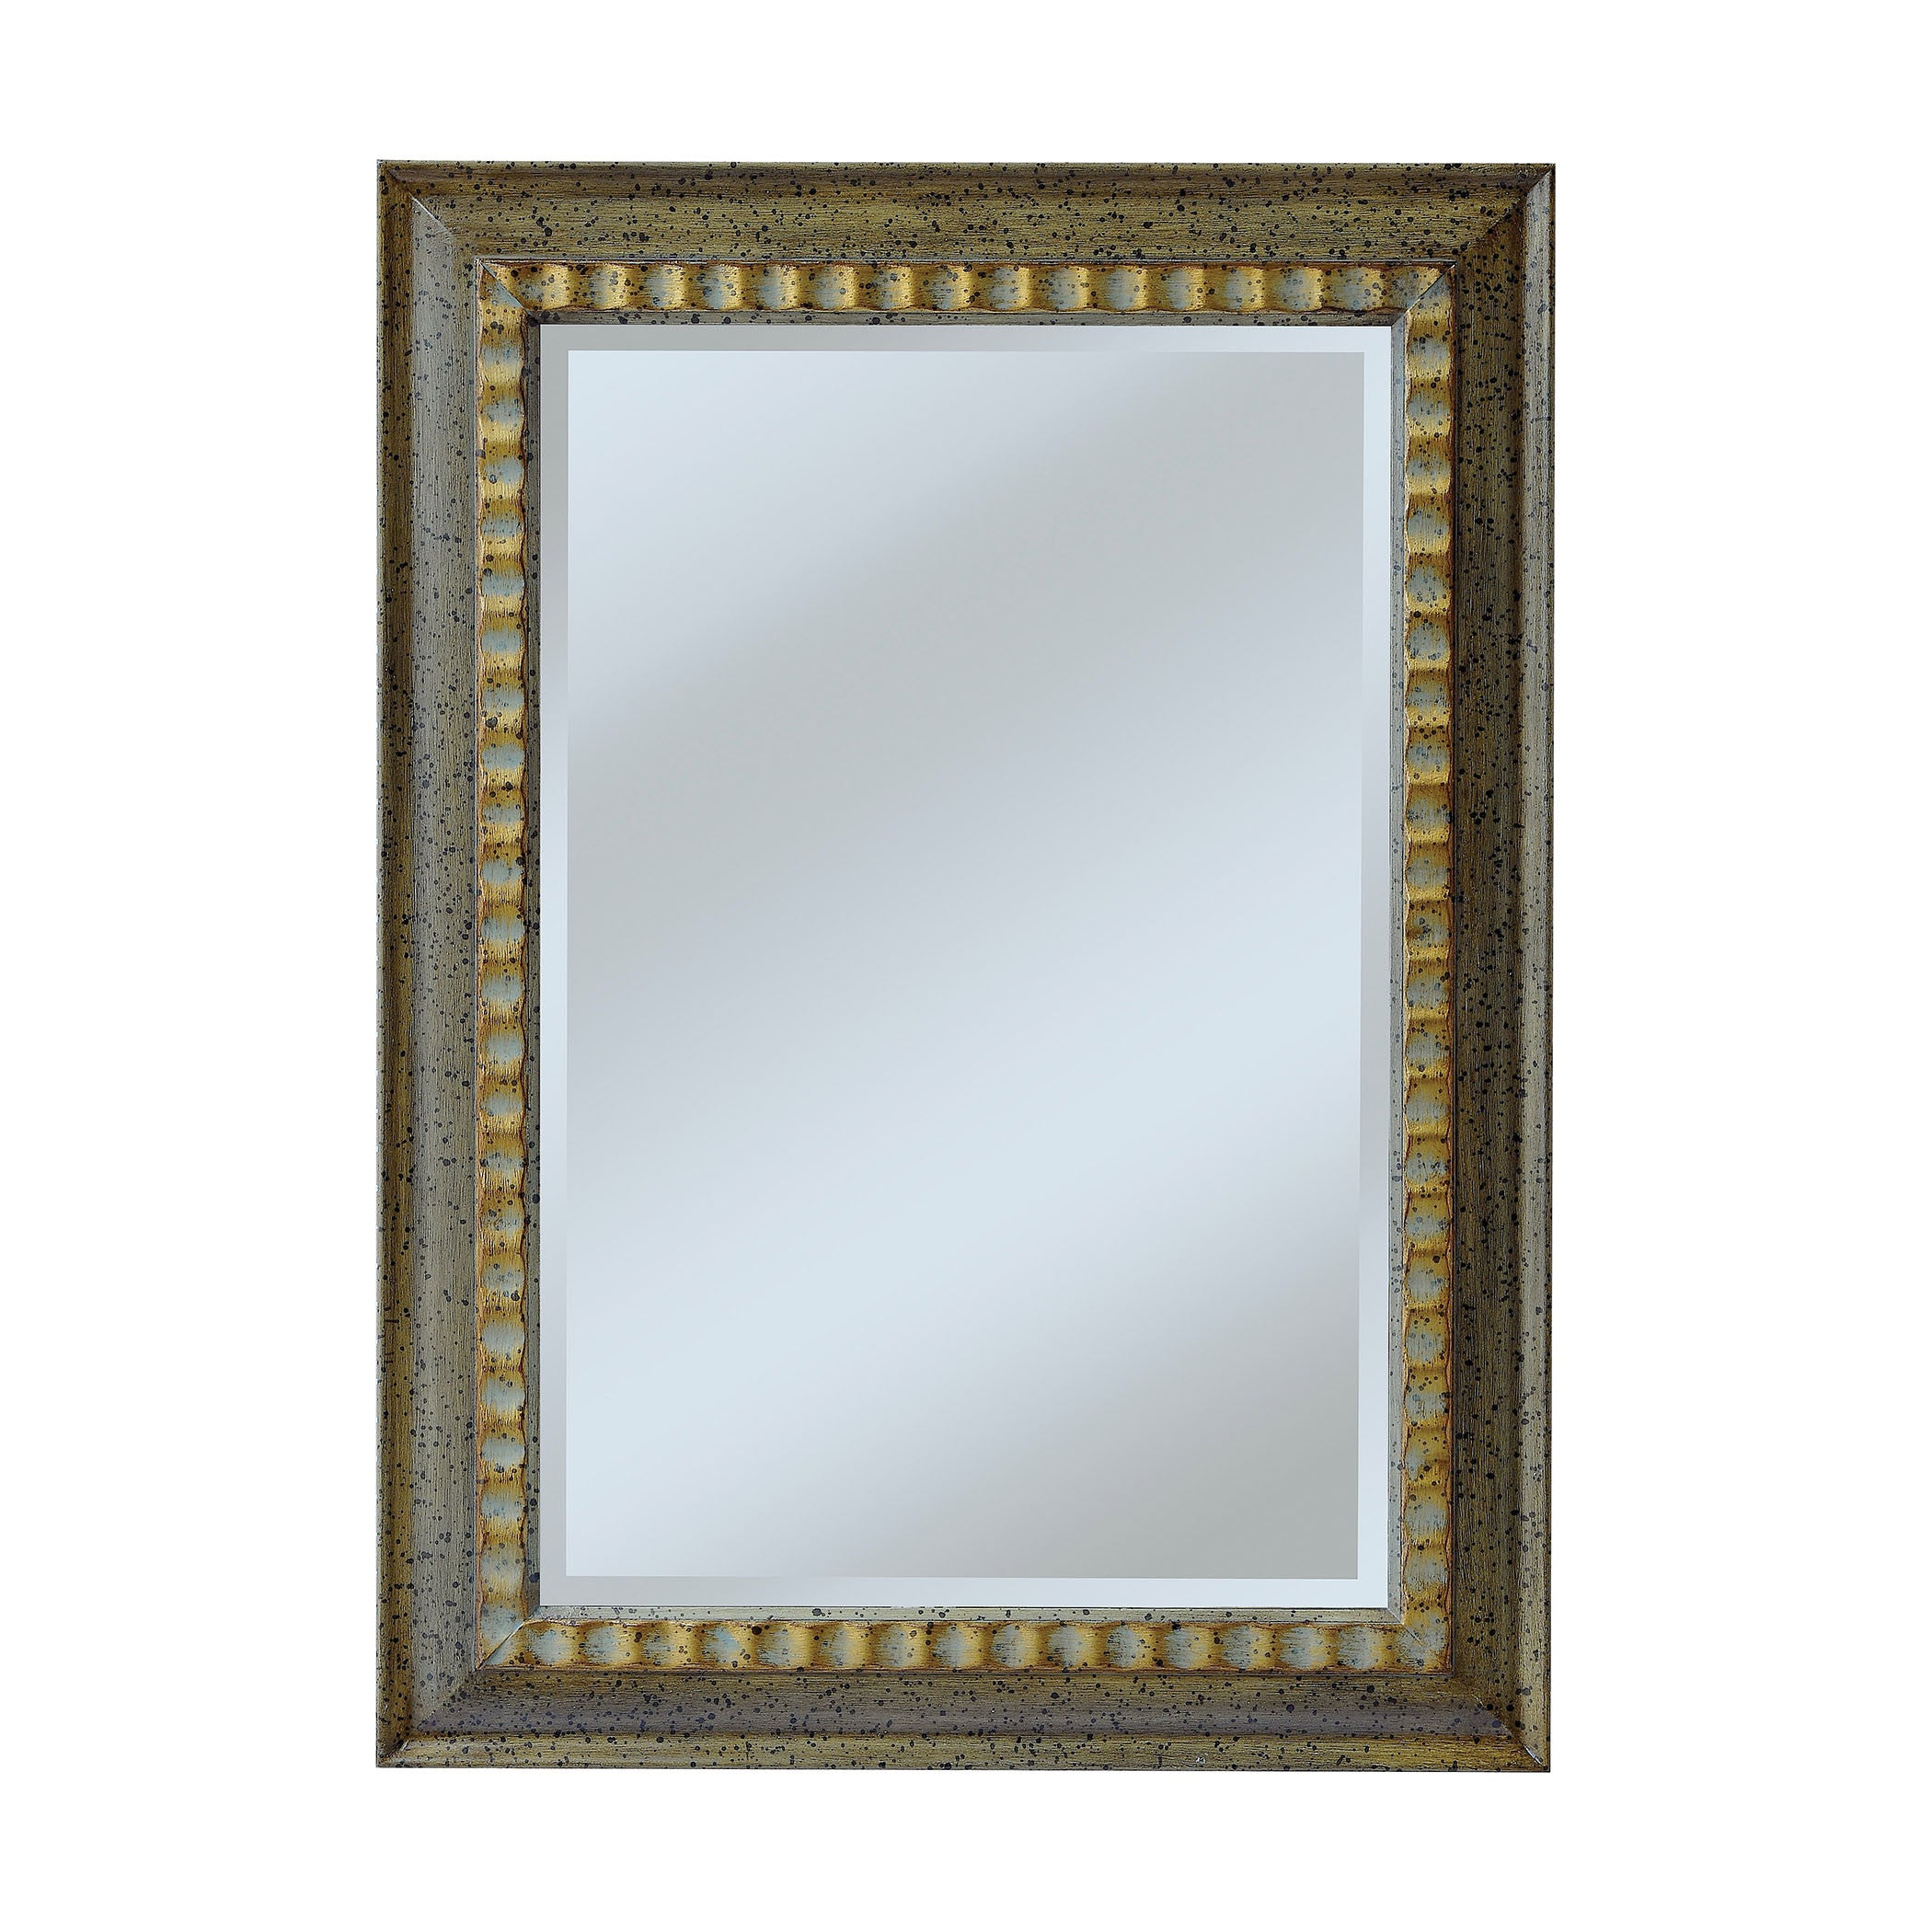 Mirror Masters Mw4049-0022 Parnell Collection Silver,gold Finish Wall Mirror